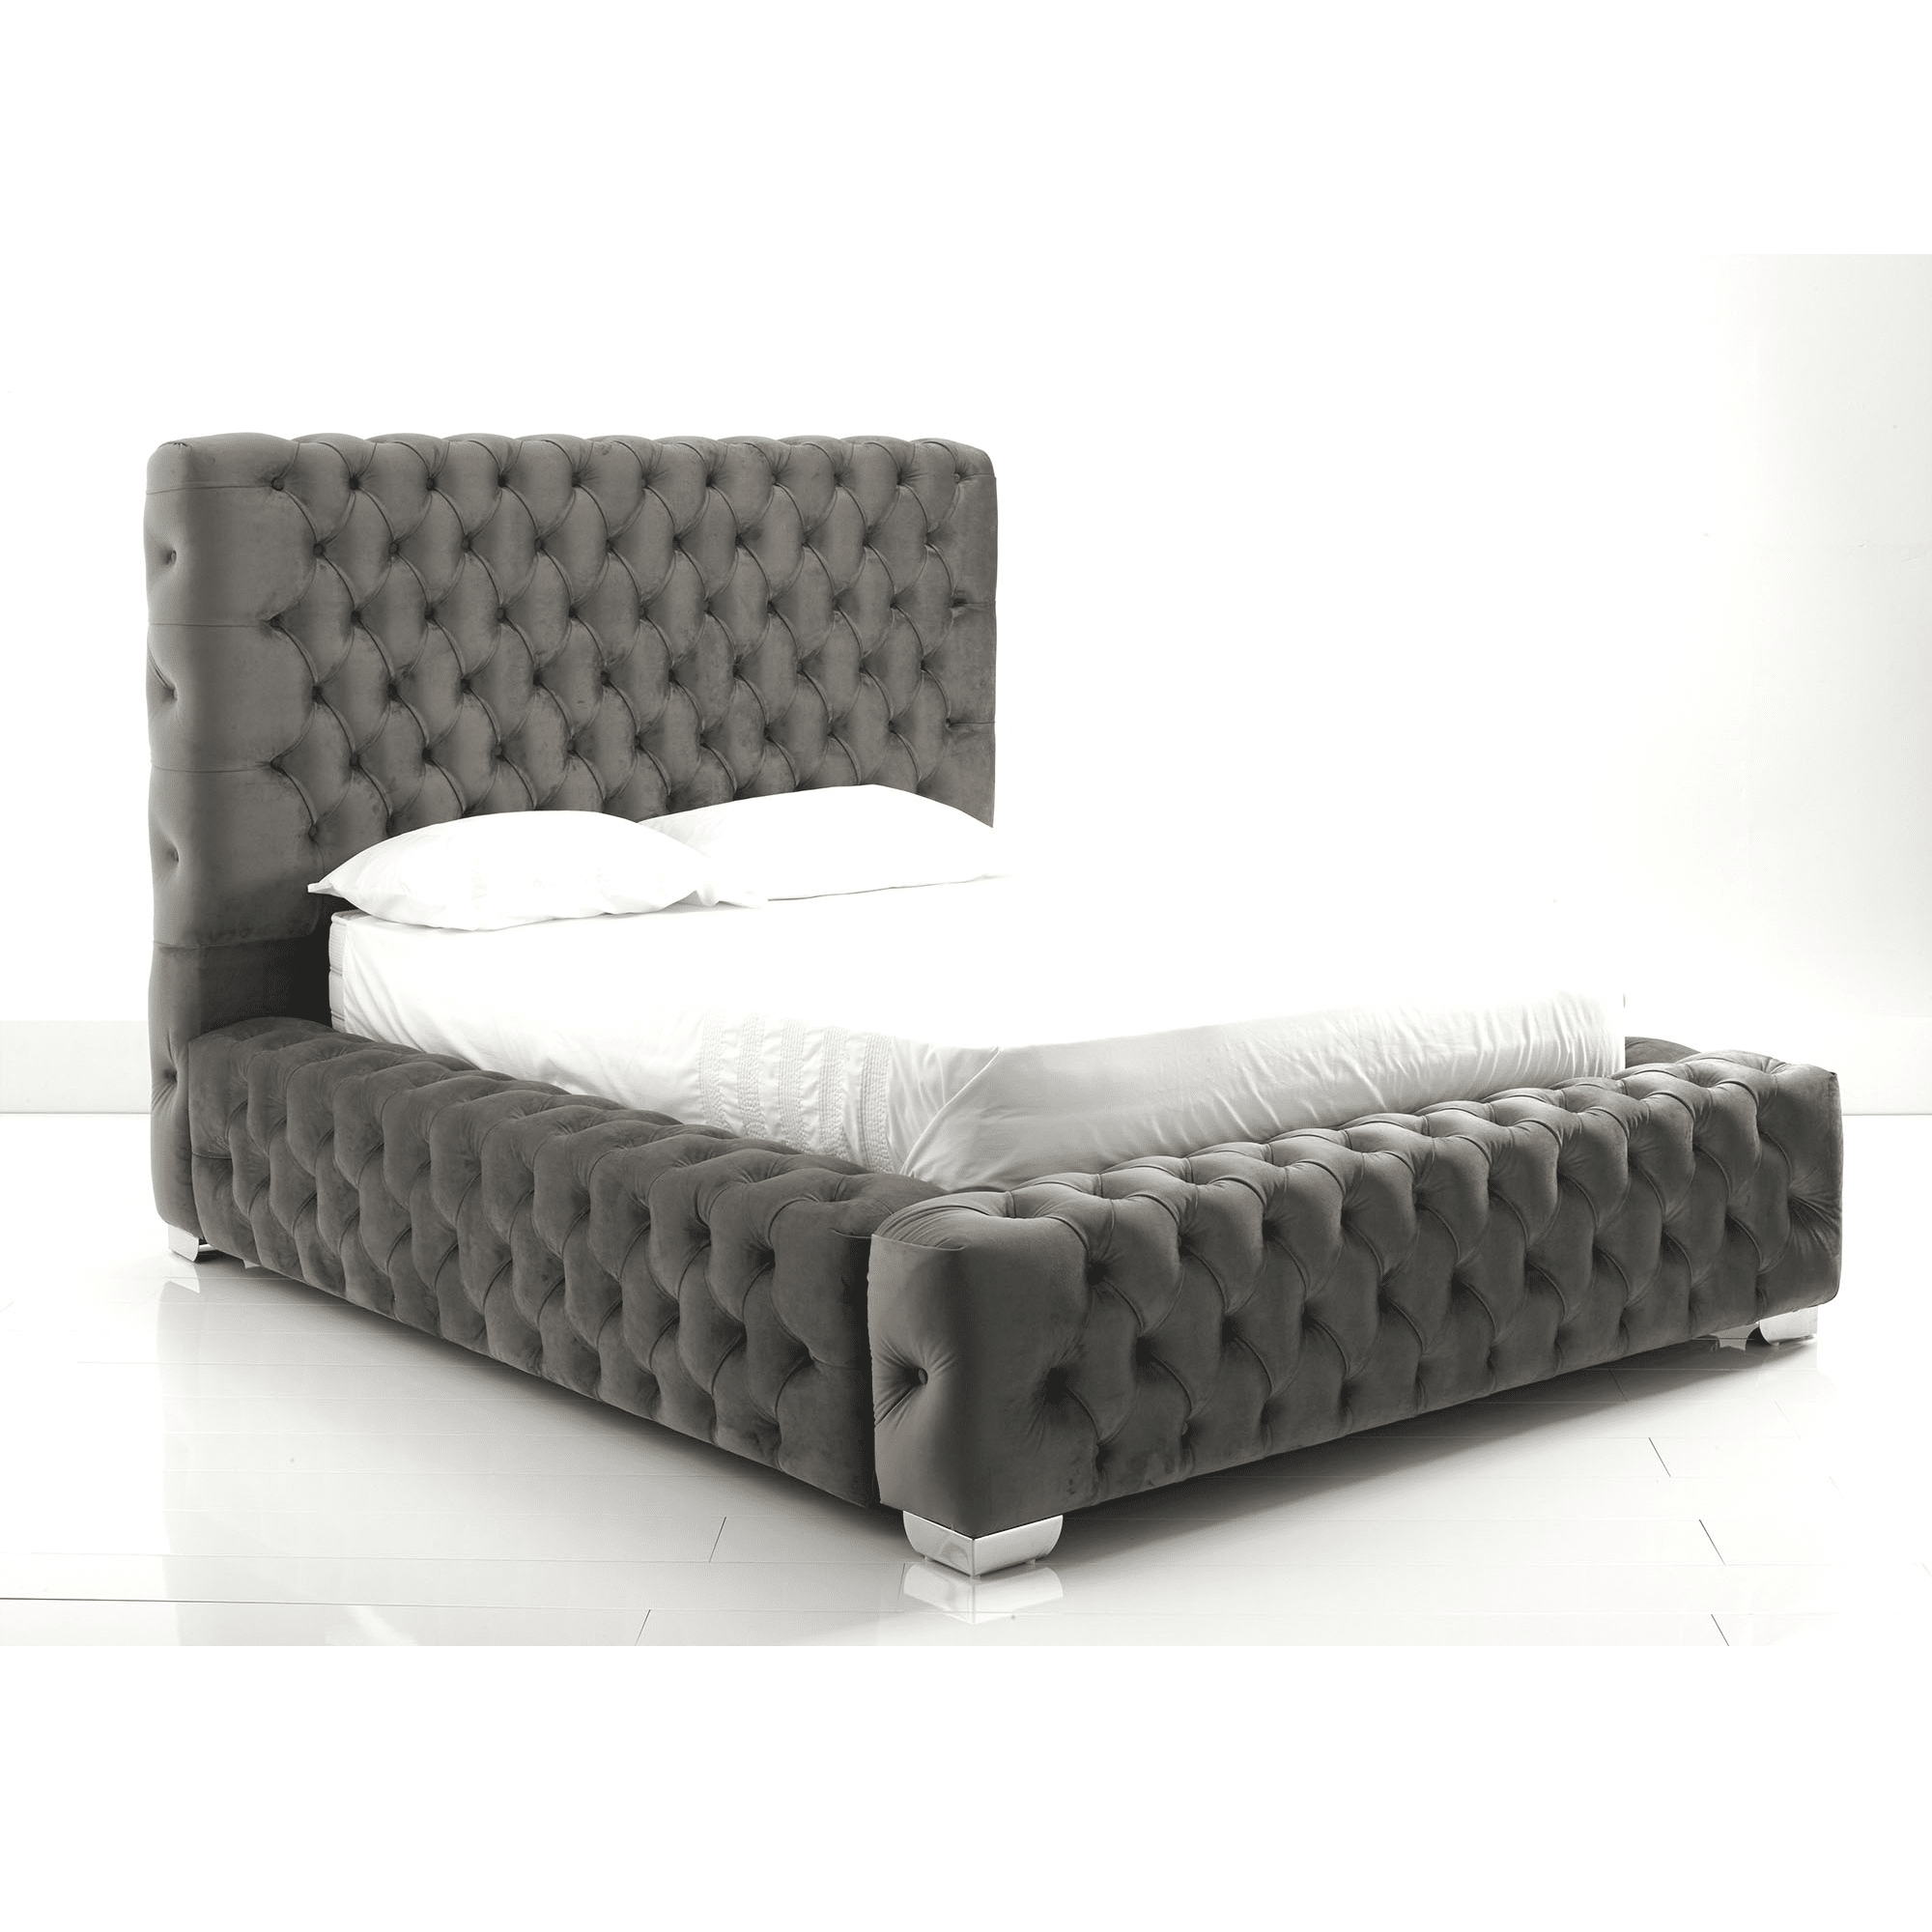 Ambassador Deluxe Bed Available In All Colours Sizes Vary From Double King Or Super King